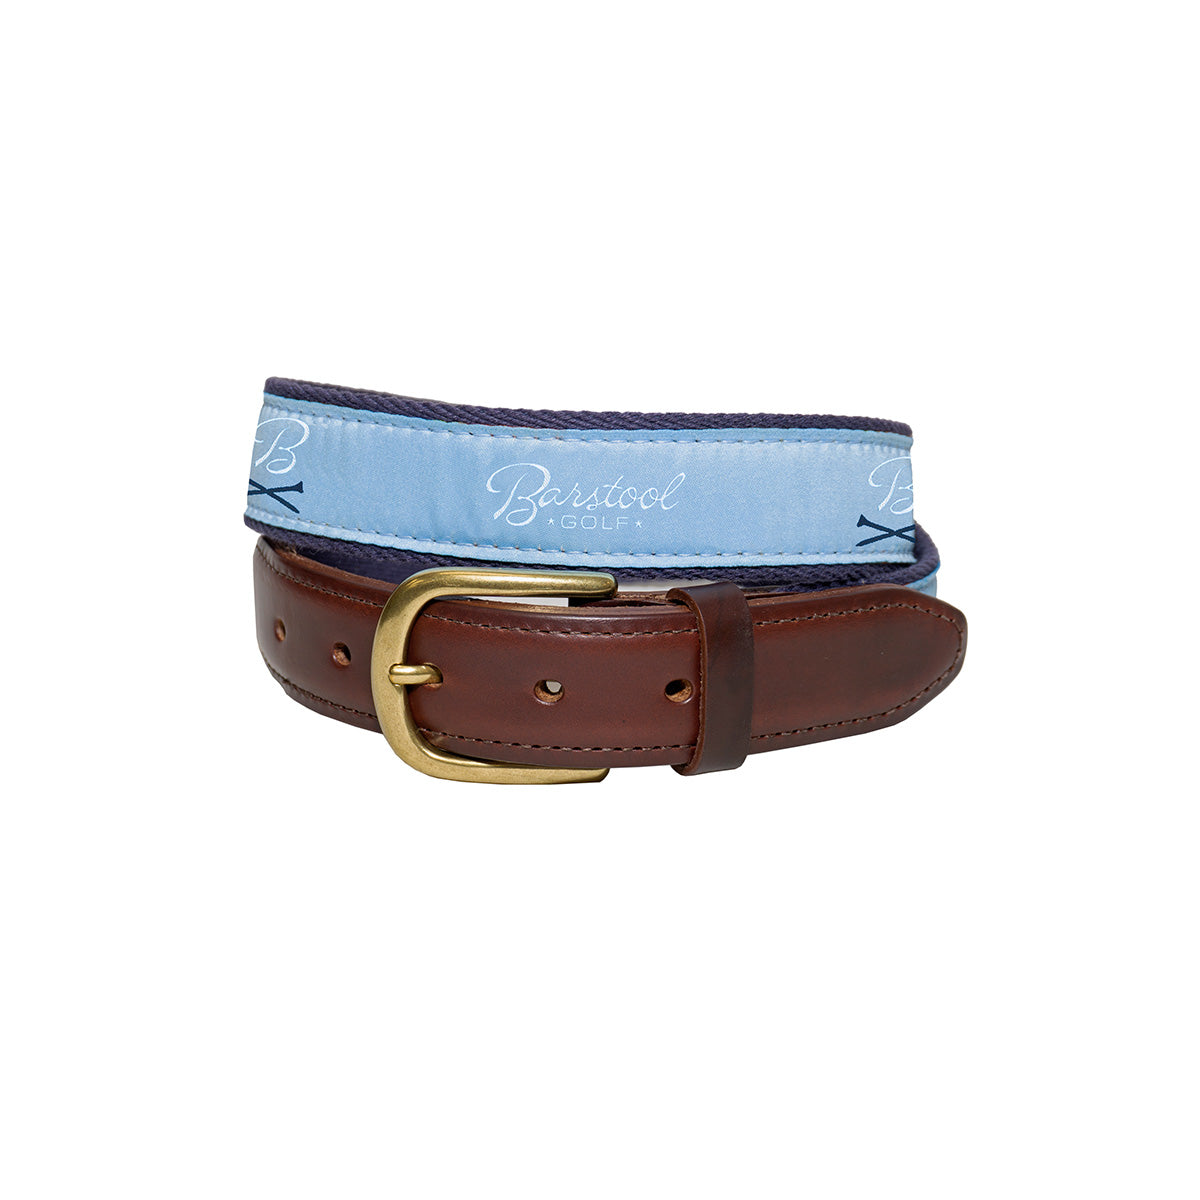 Barstool Golf Leather Ribbon Belt-Belts-Fore Play-Barstool Sports